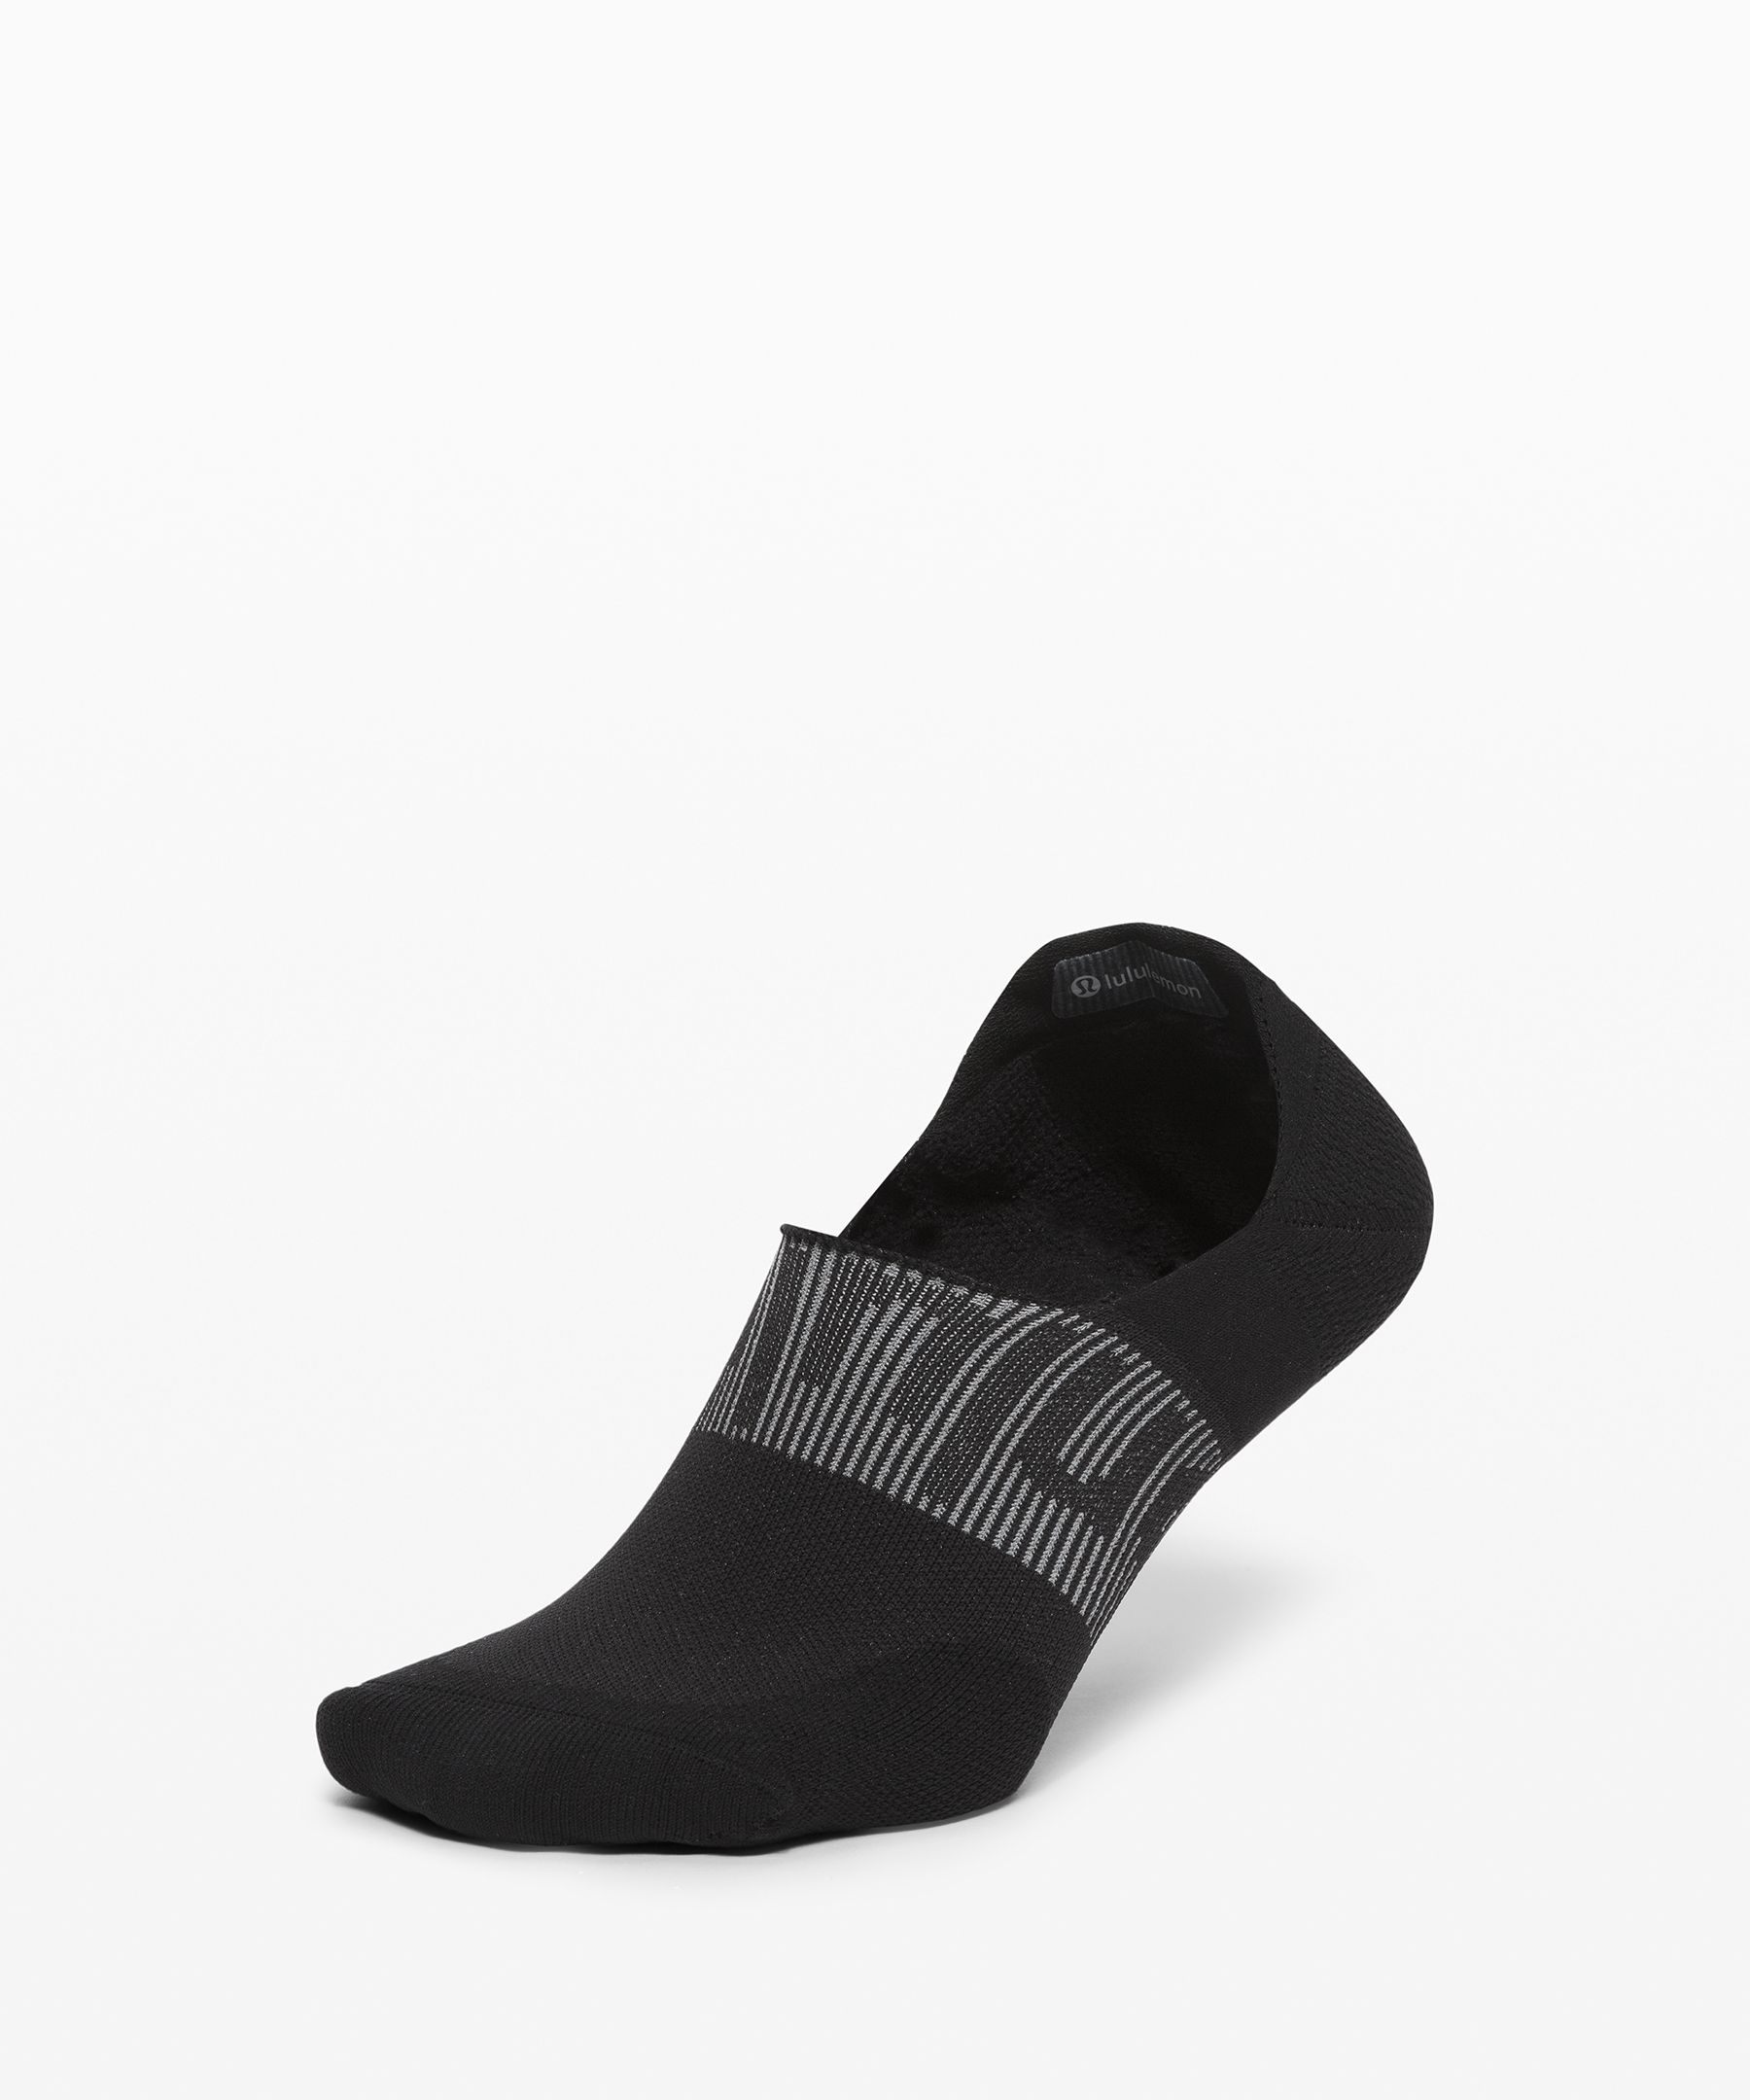 Lululemon Power Stride No-show Socks With Active Grip Anti-stink In Black